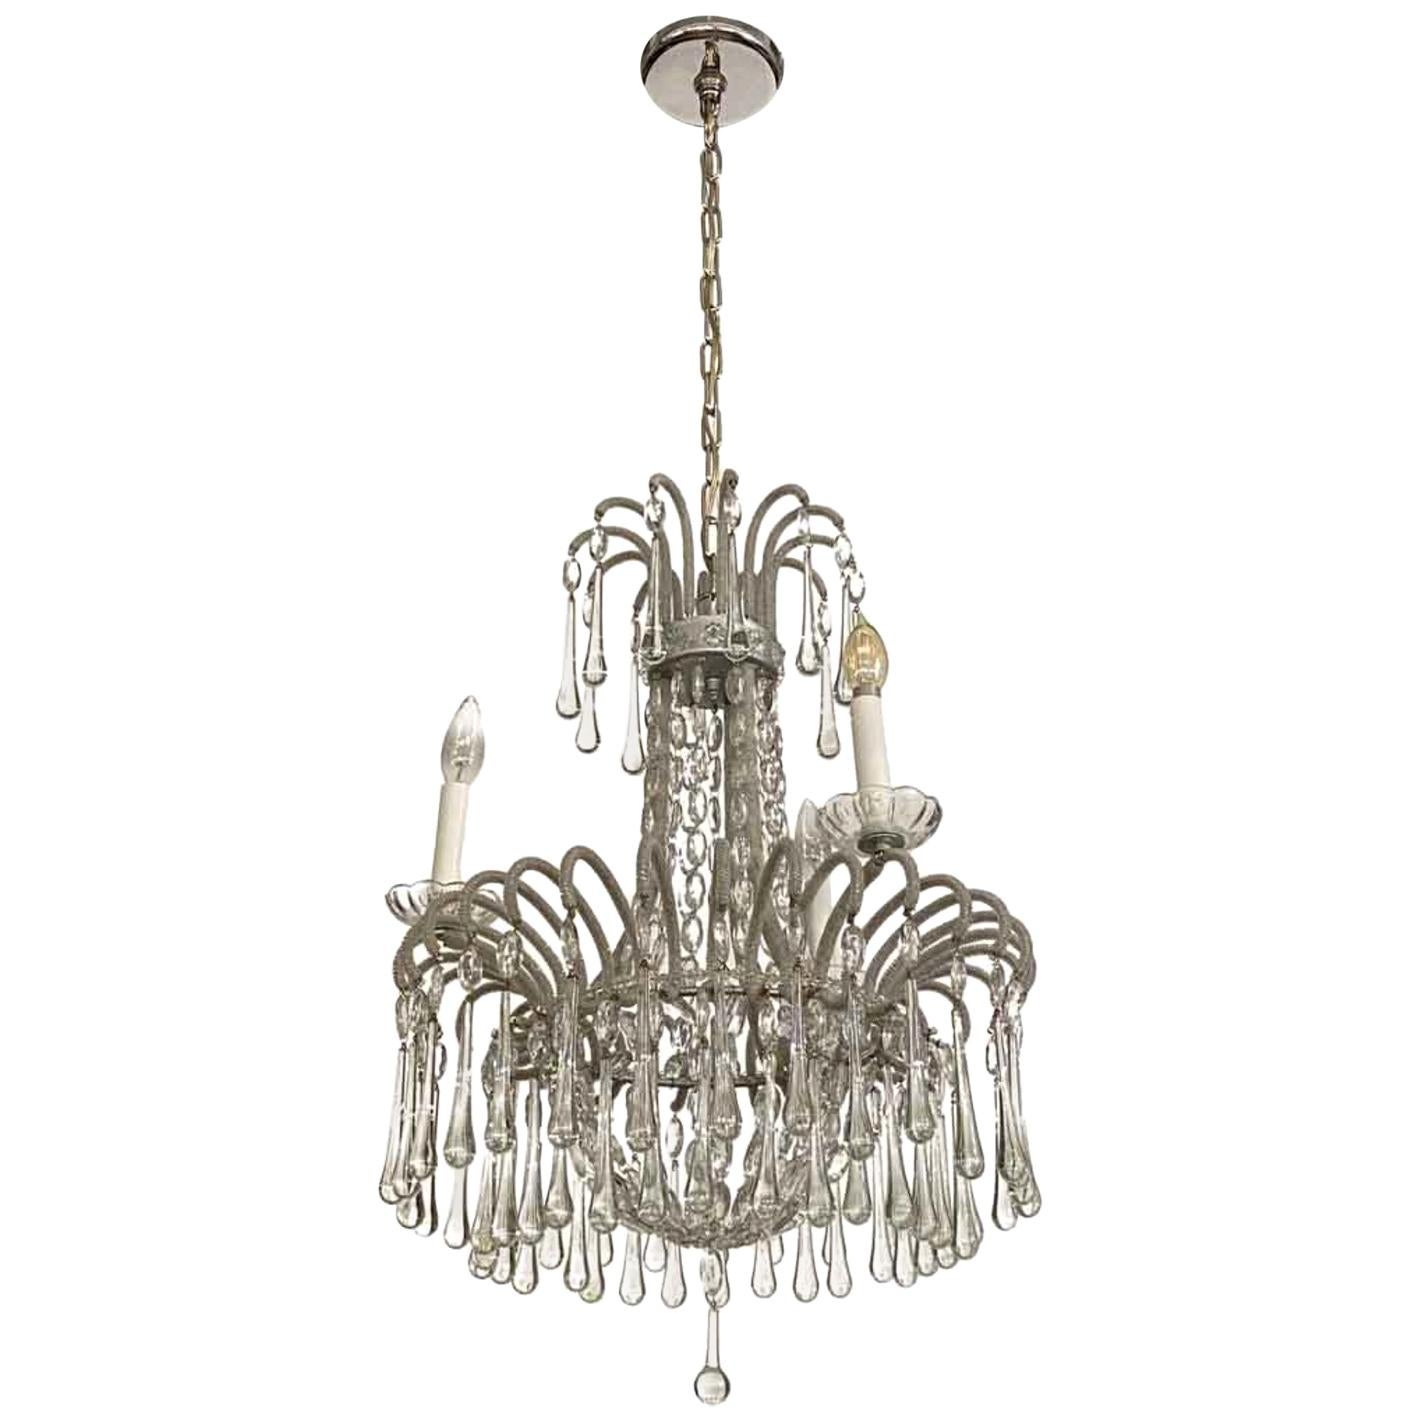 1930s Venetian Silver Finish Chandelier with Teardrop Crystals and Three Lights